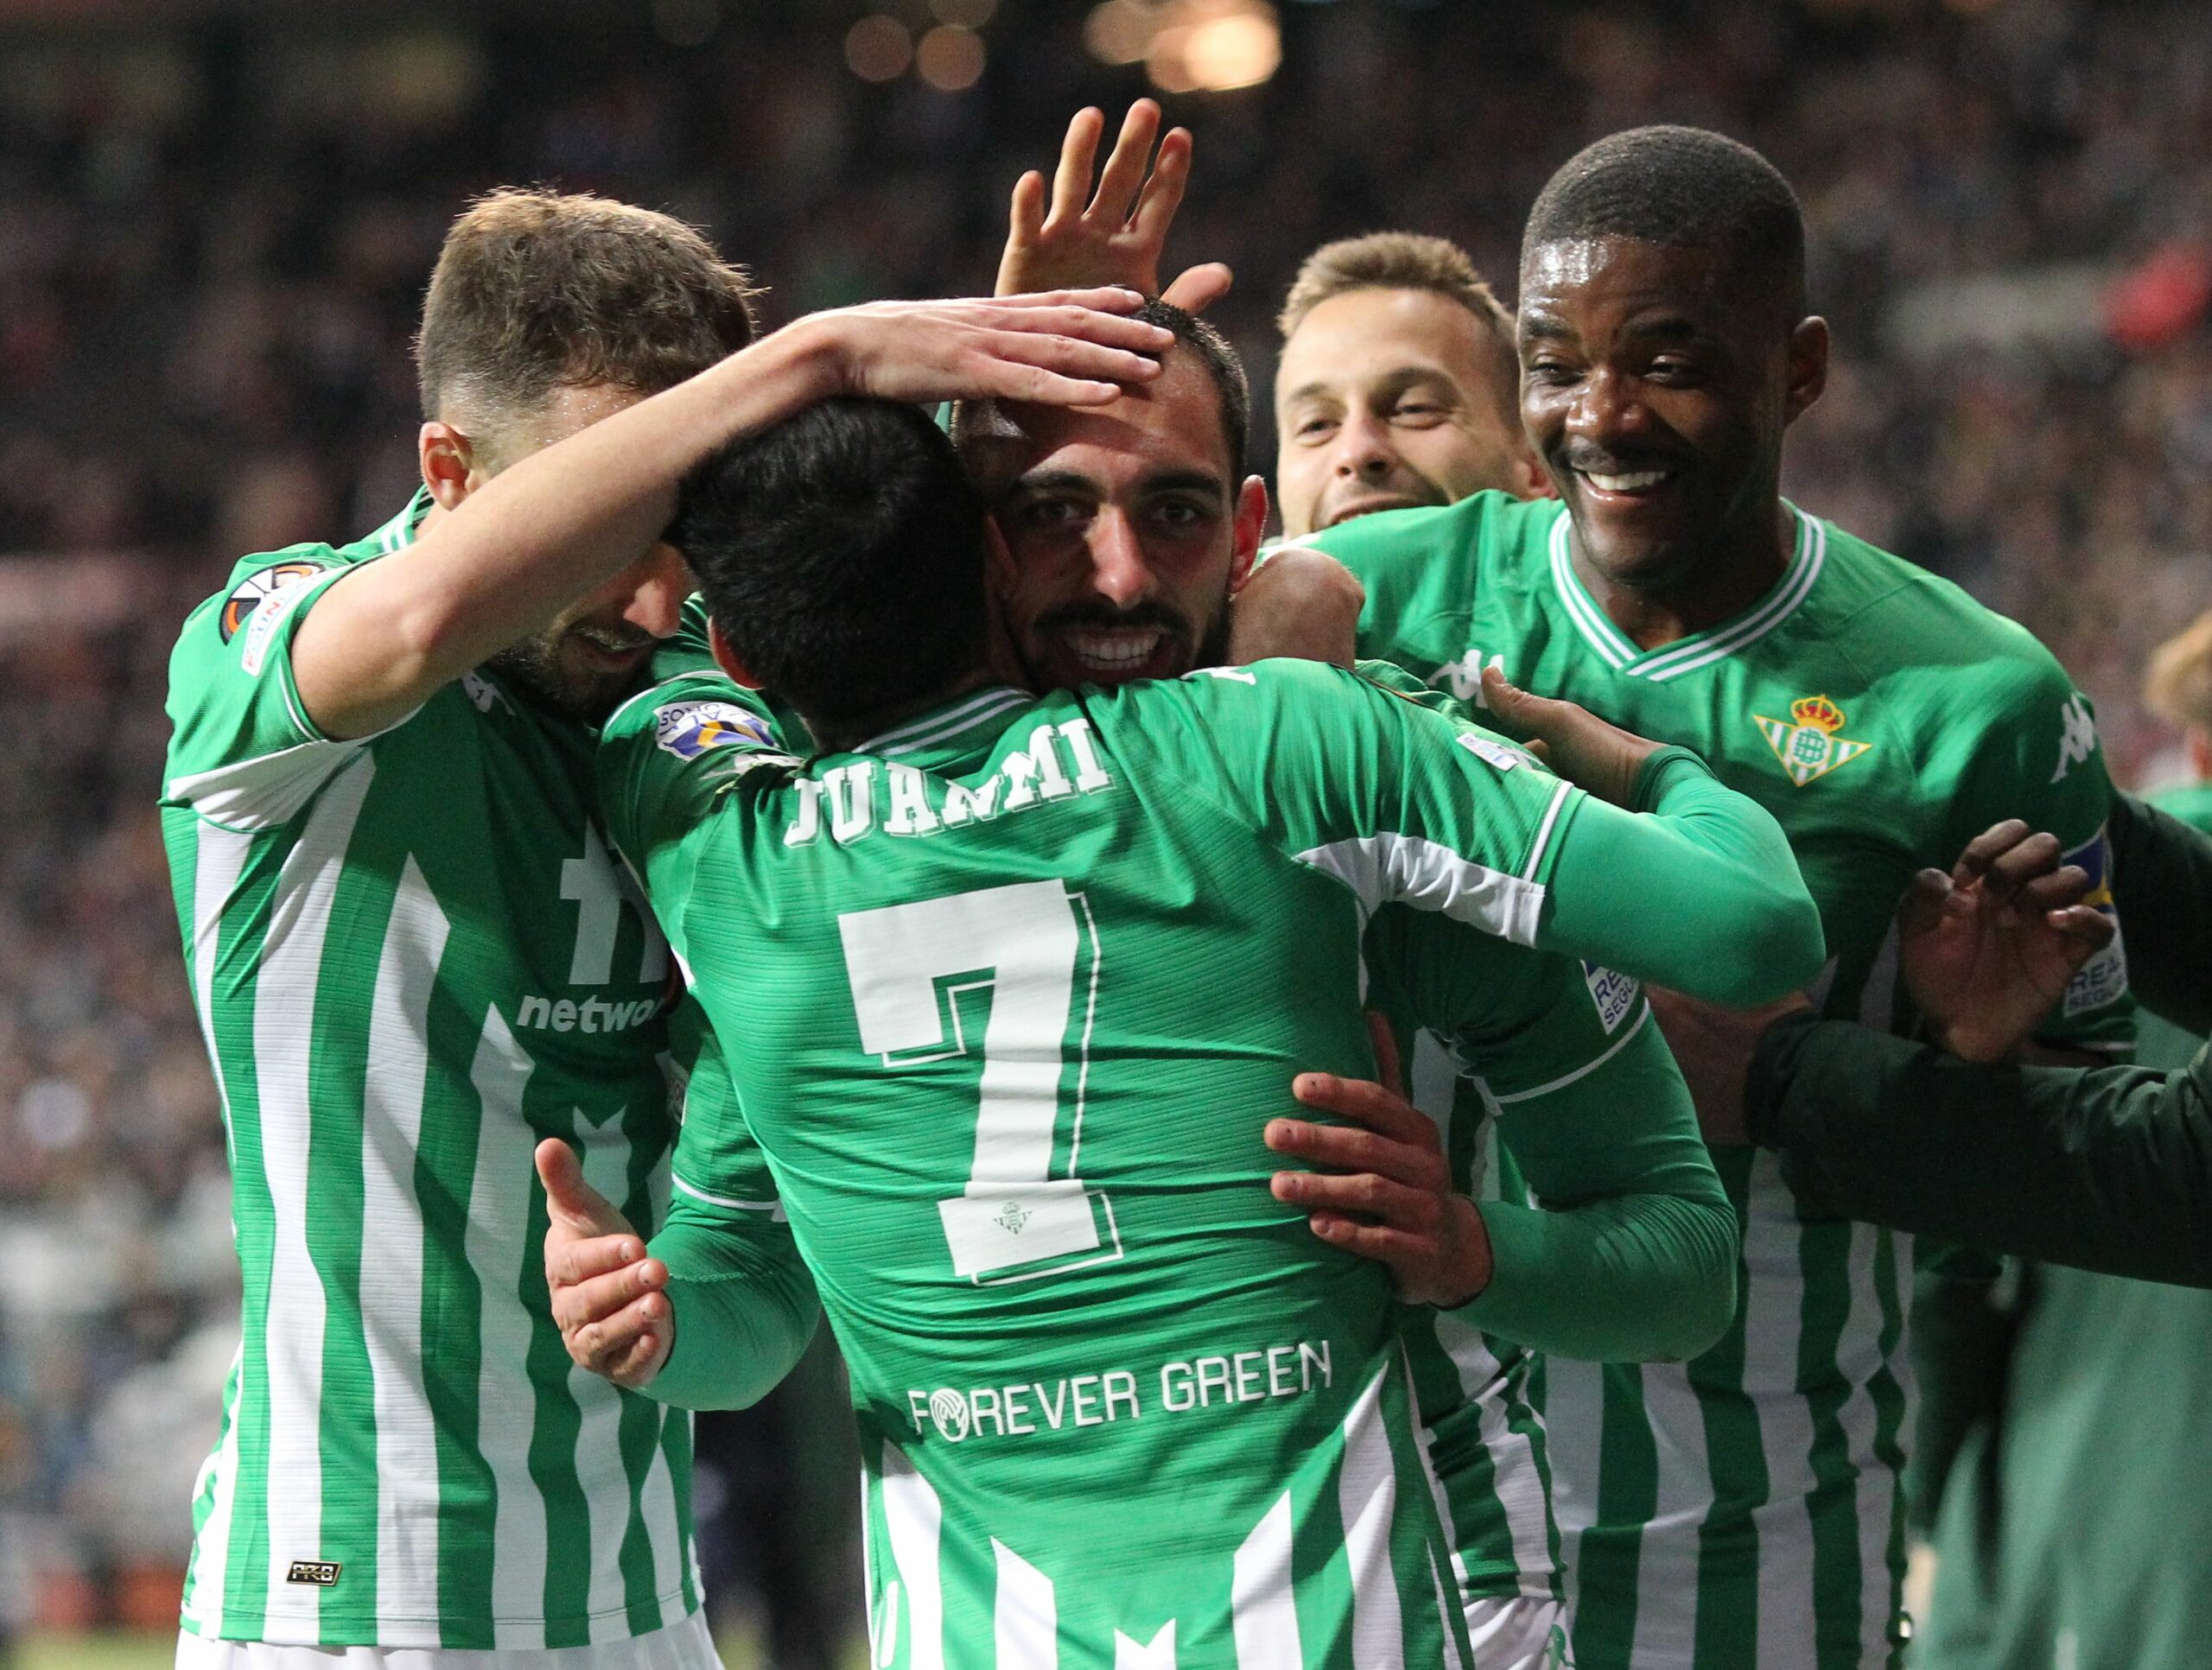 Real Betis' Spanish forward Borja Iglesias (C) celebrates scoring the opening goal with his teammates during the UEFA Europa League Last 16, 2nd-leg football match Eintracht Frankfurt v Real Betis in Frankfurt, western Germany, on March 17, 2022. (Photo by Daniel ROLAND / AFP) (Photo by DANIEL ROLAND/AFP via Getty Images)